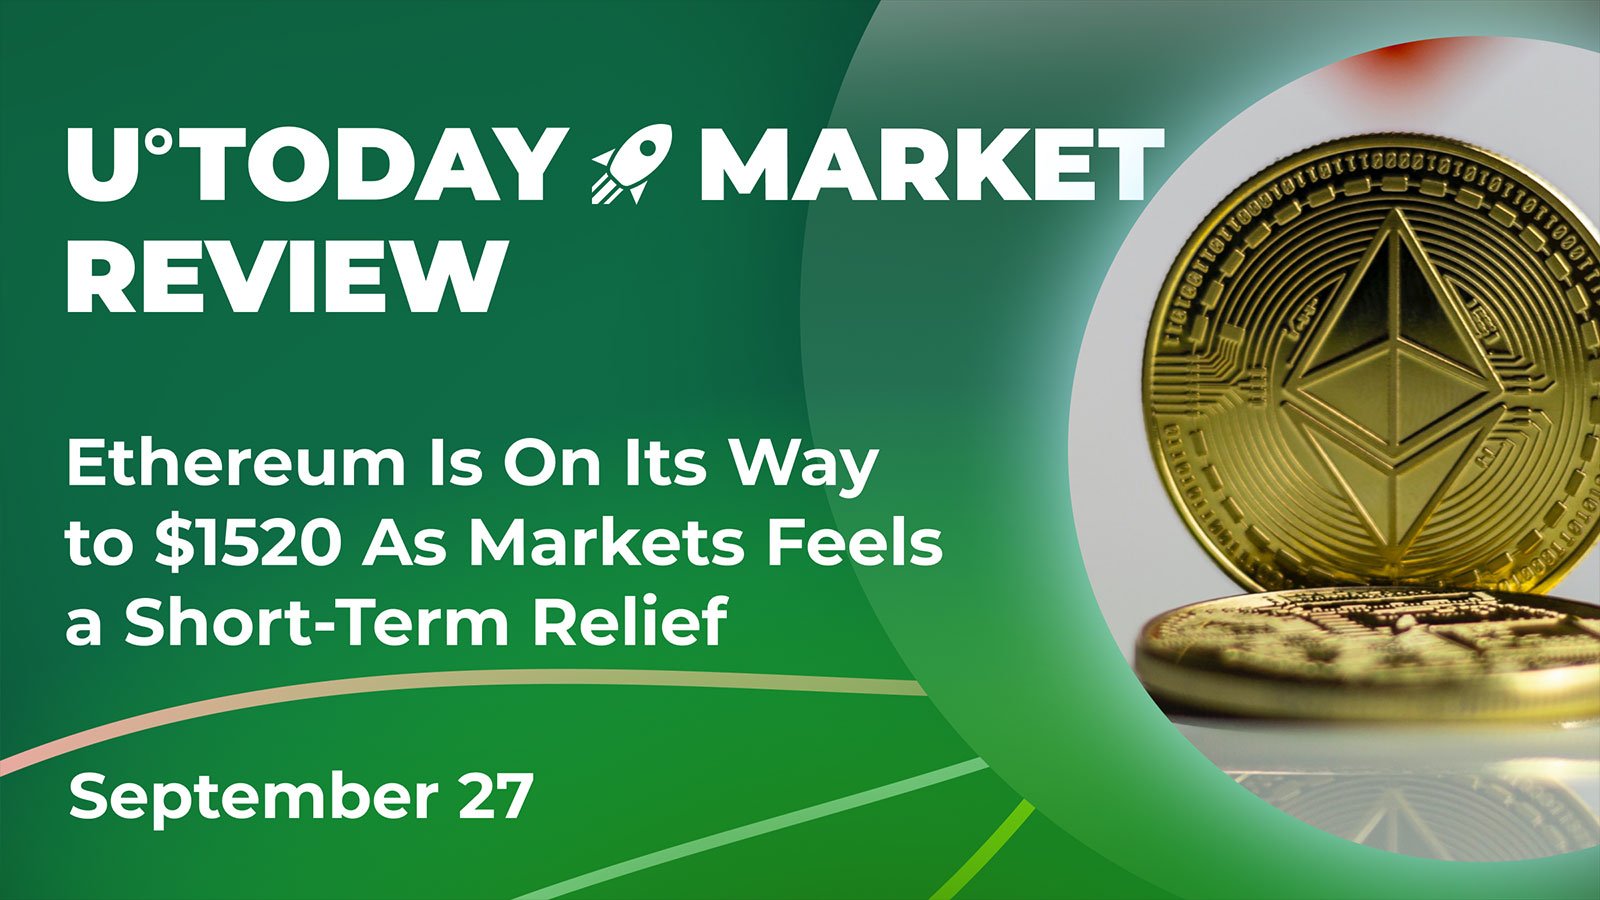 ethereum-is-on-its-way-to-usd1-520-as-markets-feel-short-term-relief-crypto-market-review-september-27